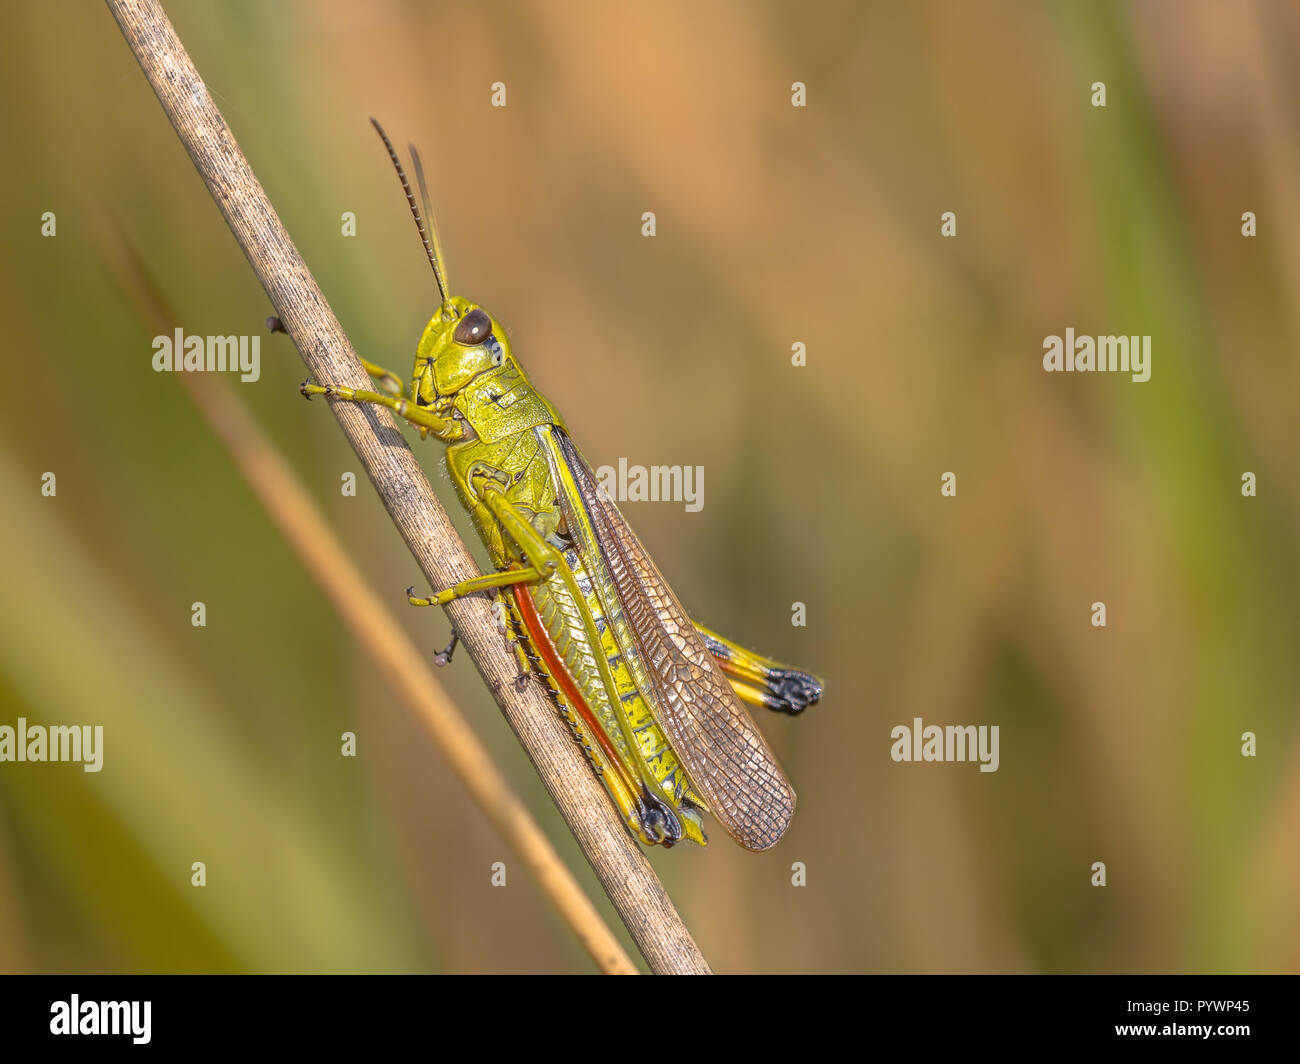 Rare Marsh Grasshopper (Stethophyma grossum). A threatened insect species typical for marshland and swamp habitats with significant ecological value Stock Photo